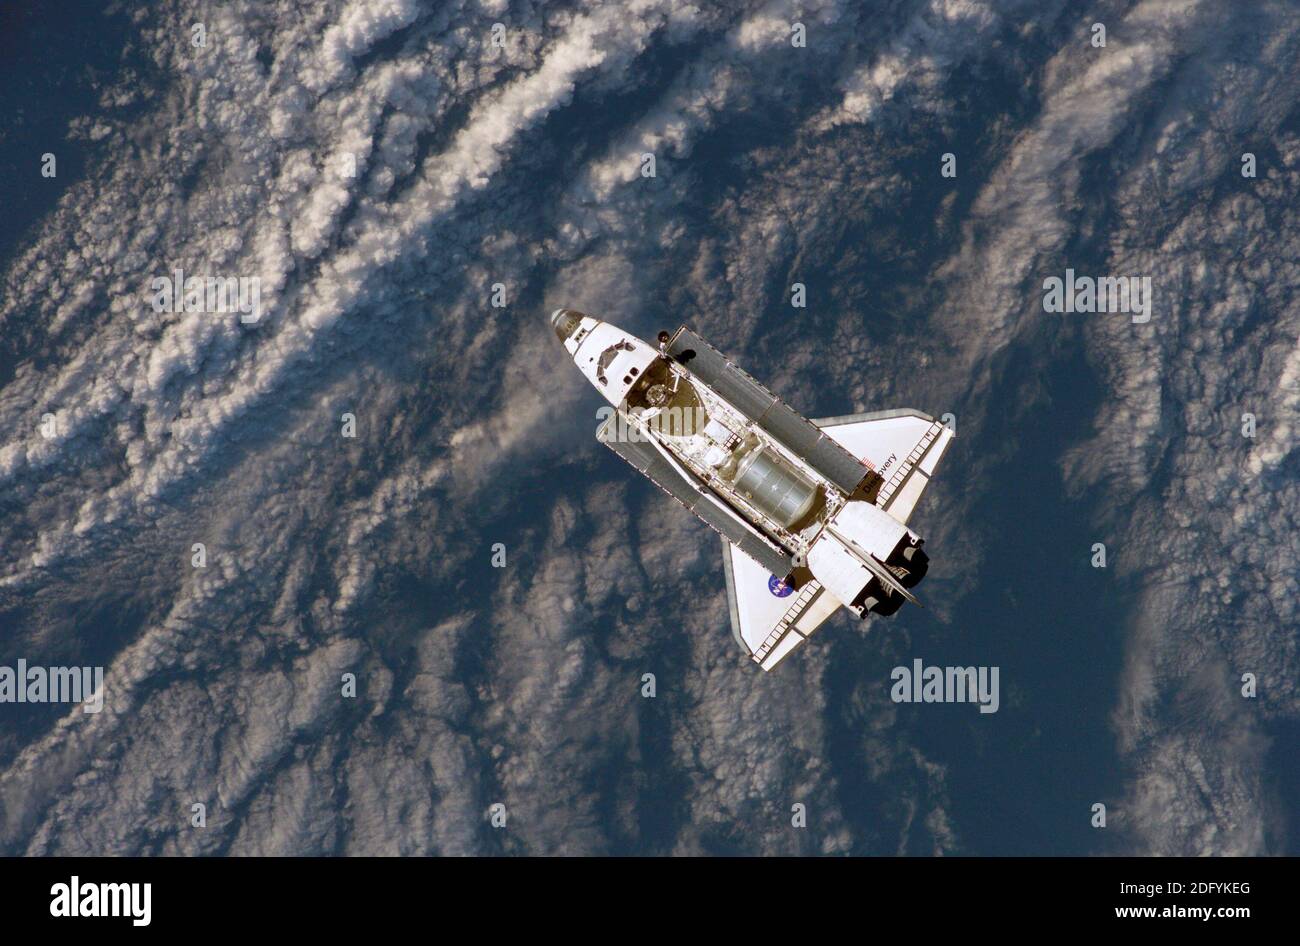 ISS - 06 JulY 2006 - The Space Shuttle Discovery approaches the International Space Station for docking but before the link-up occurred, the orbiter ' Stock Photo